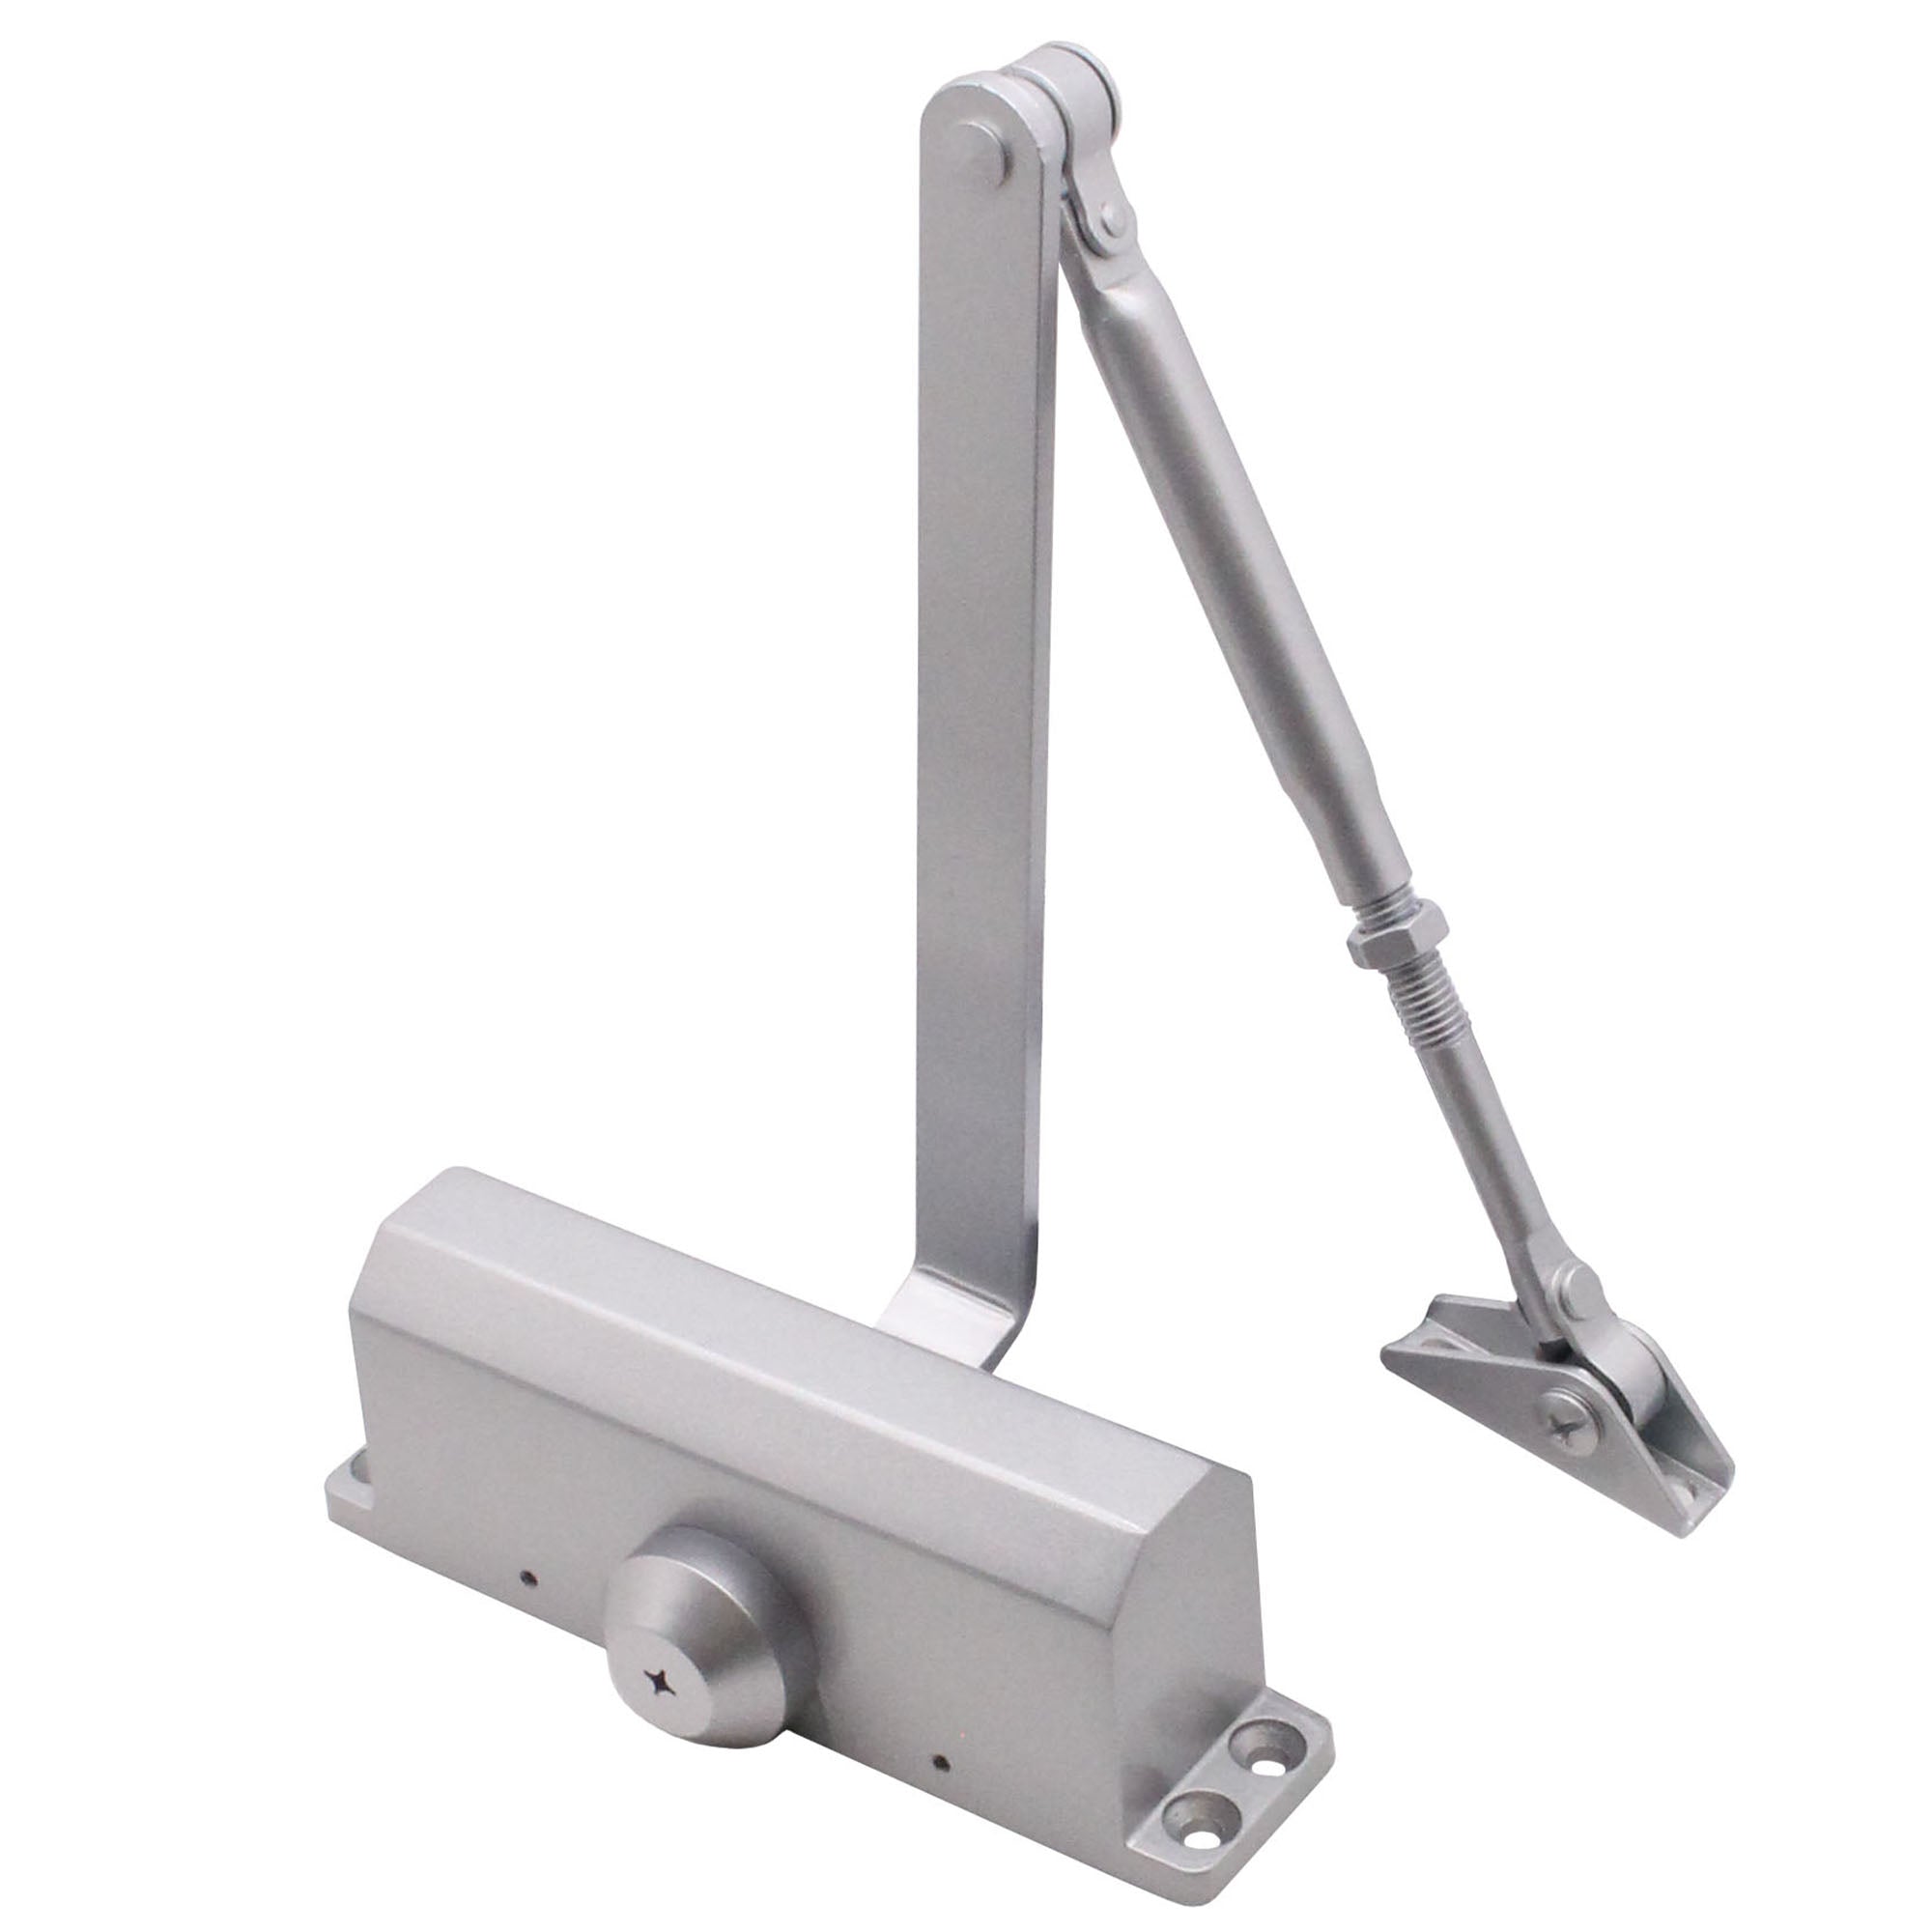 Overhead Fire Door Closer Universal Reversible Push or Pull Side - Power  Size 3 - Silver